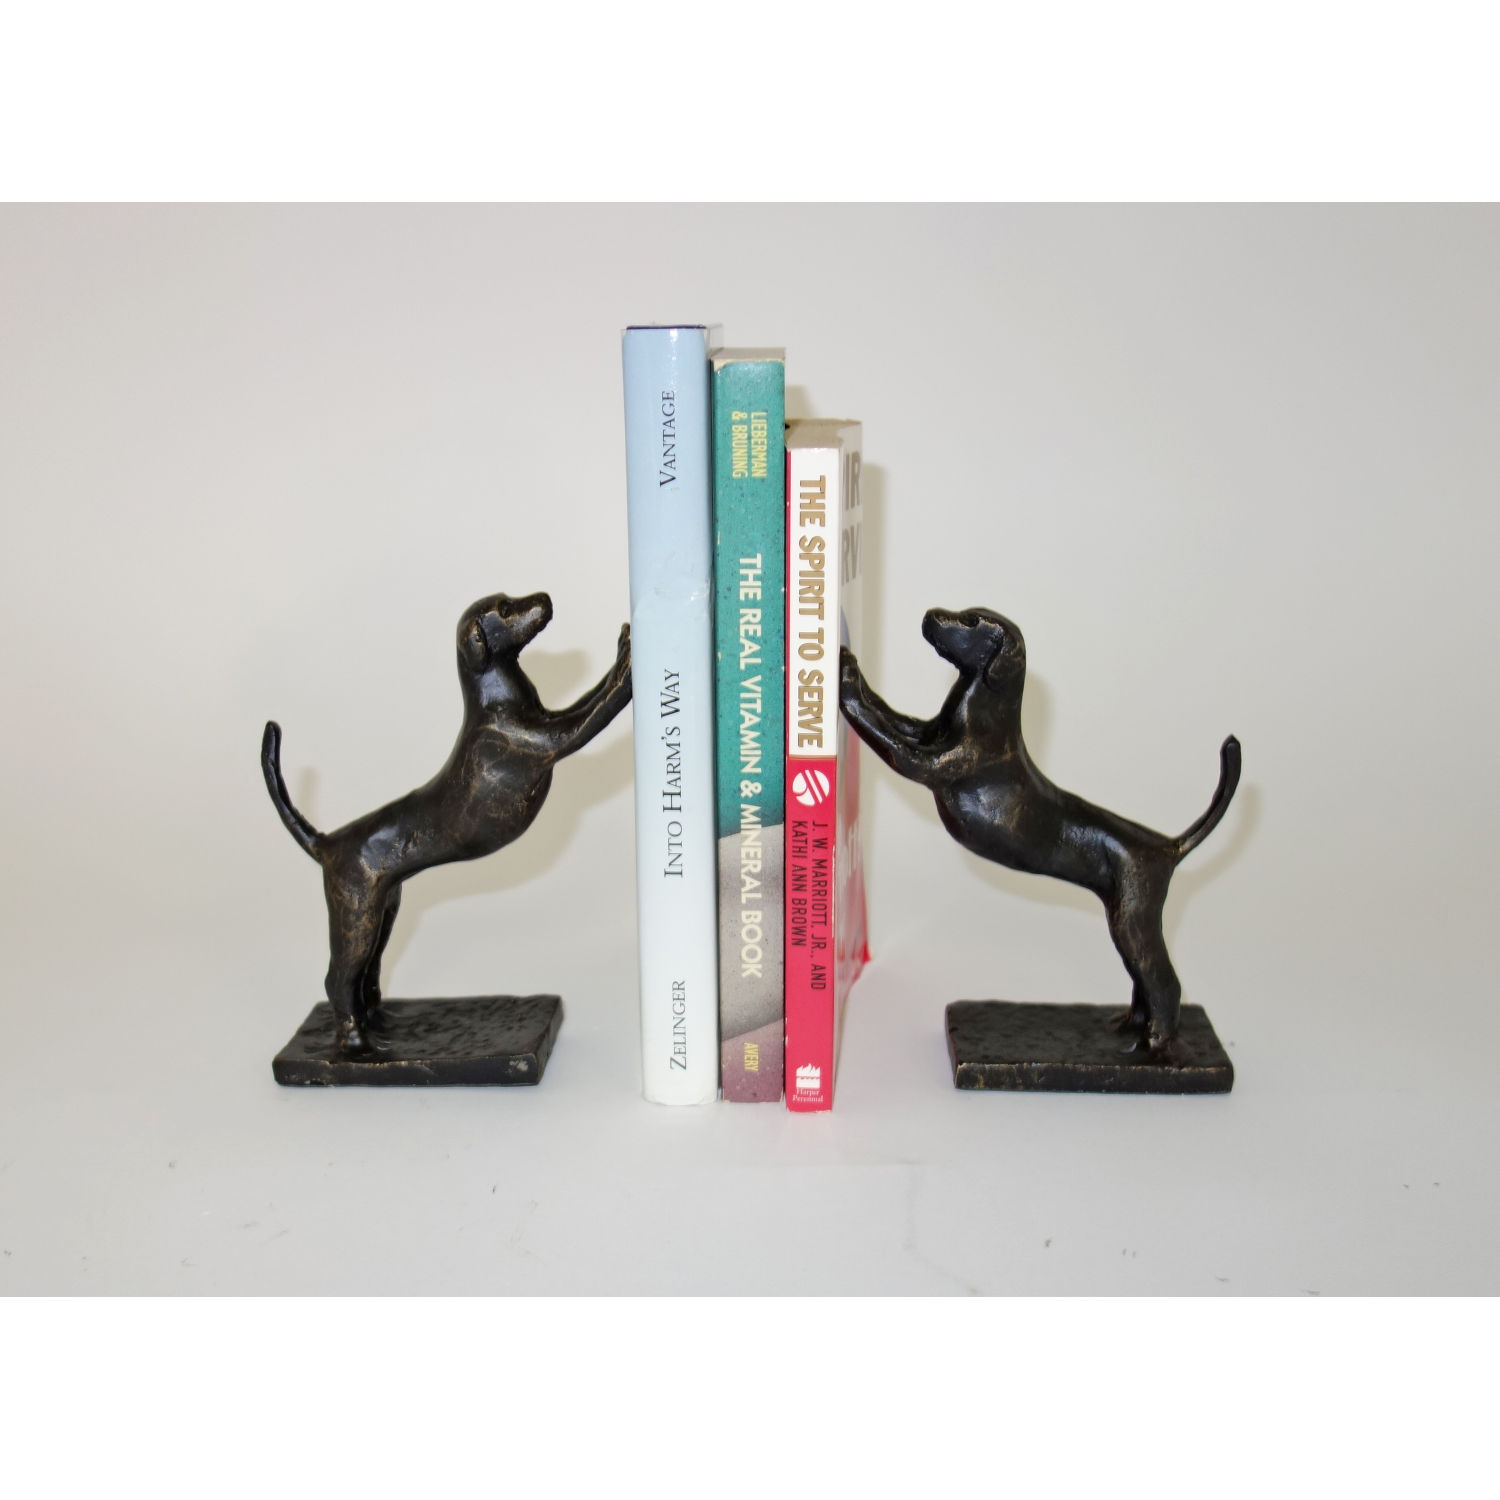 Bookends Category